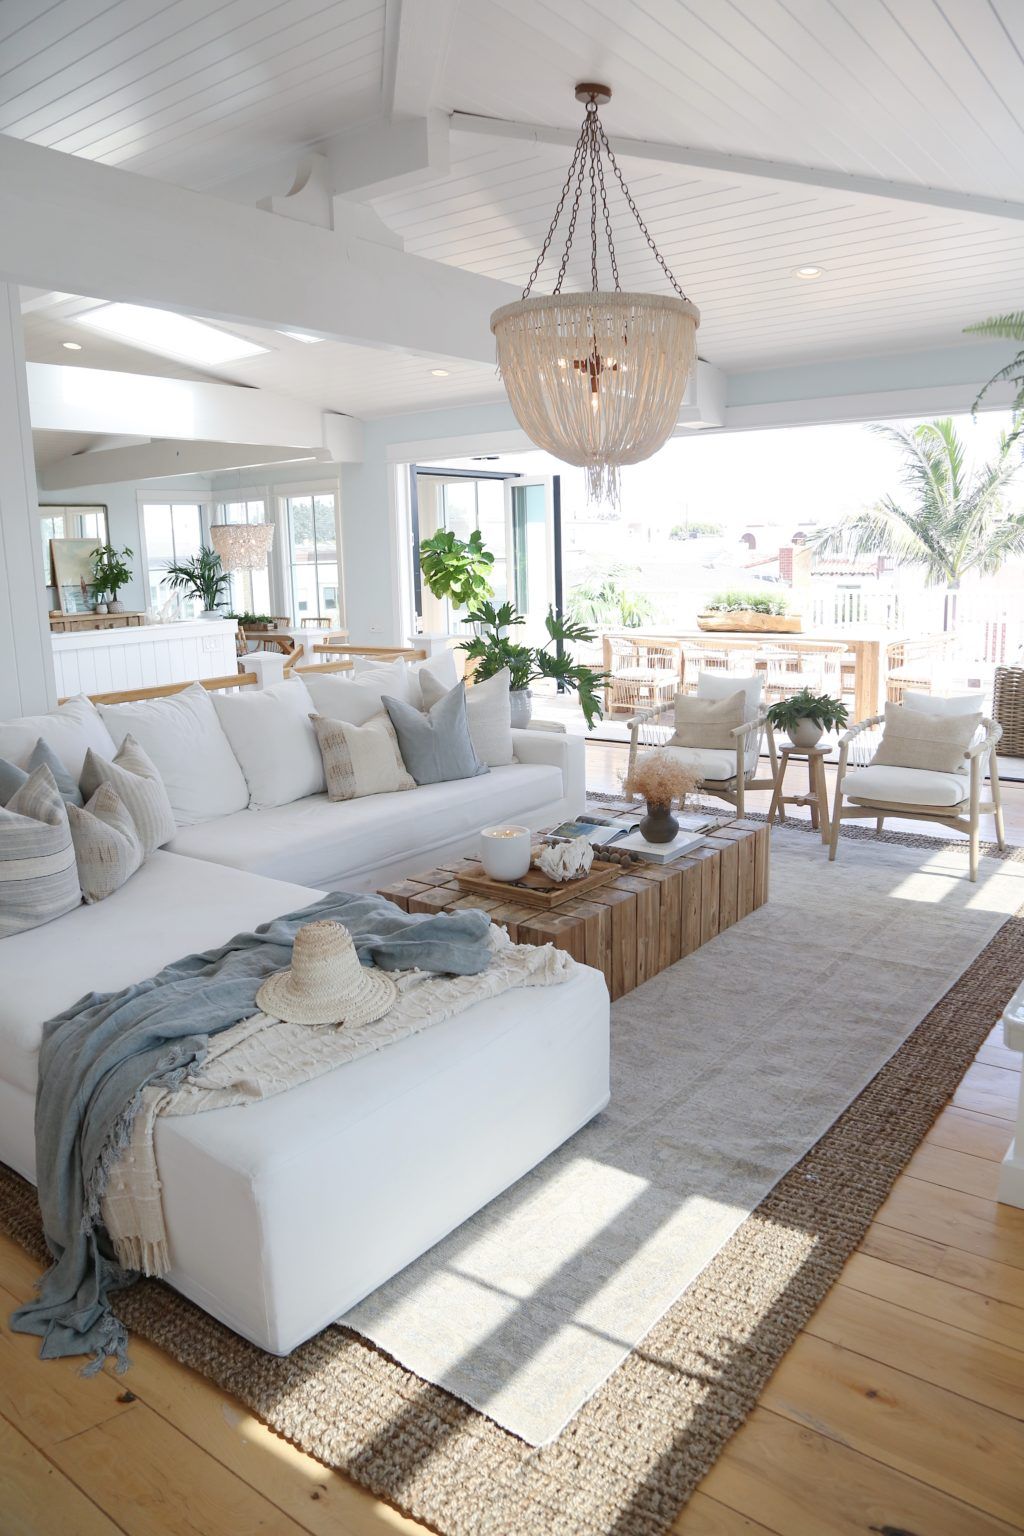 Embracing Coastal Design: How to
Incorporate Coastal Furniture in Your Home